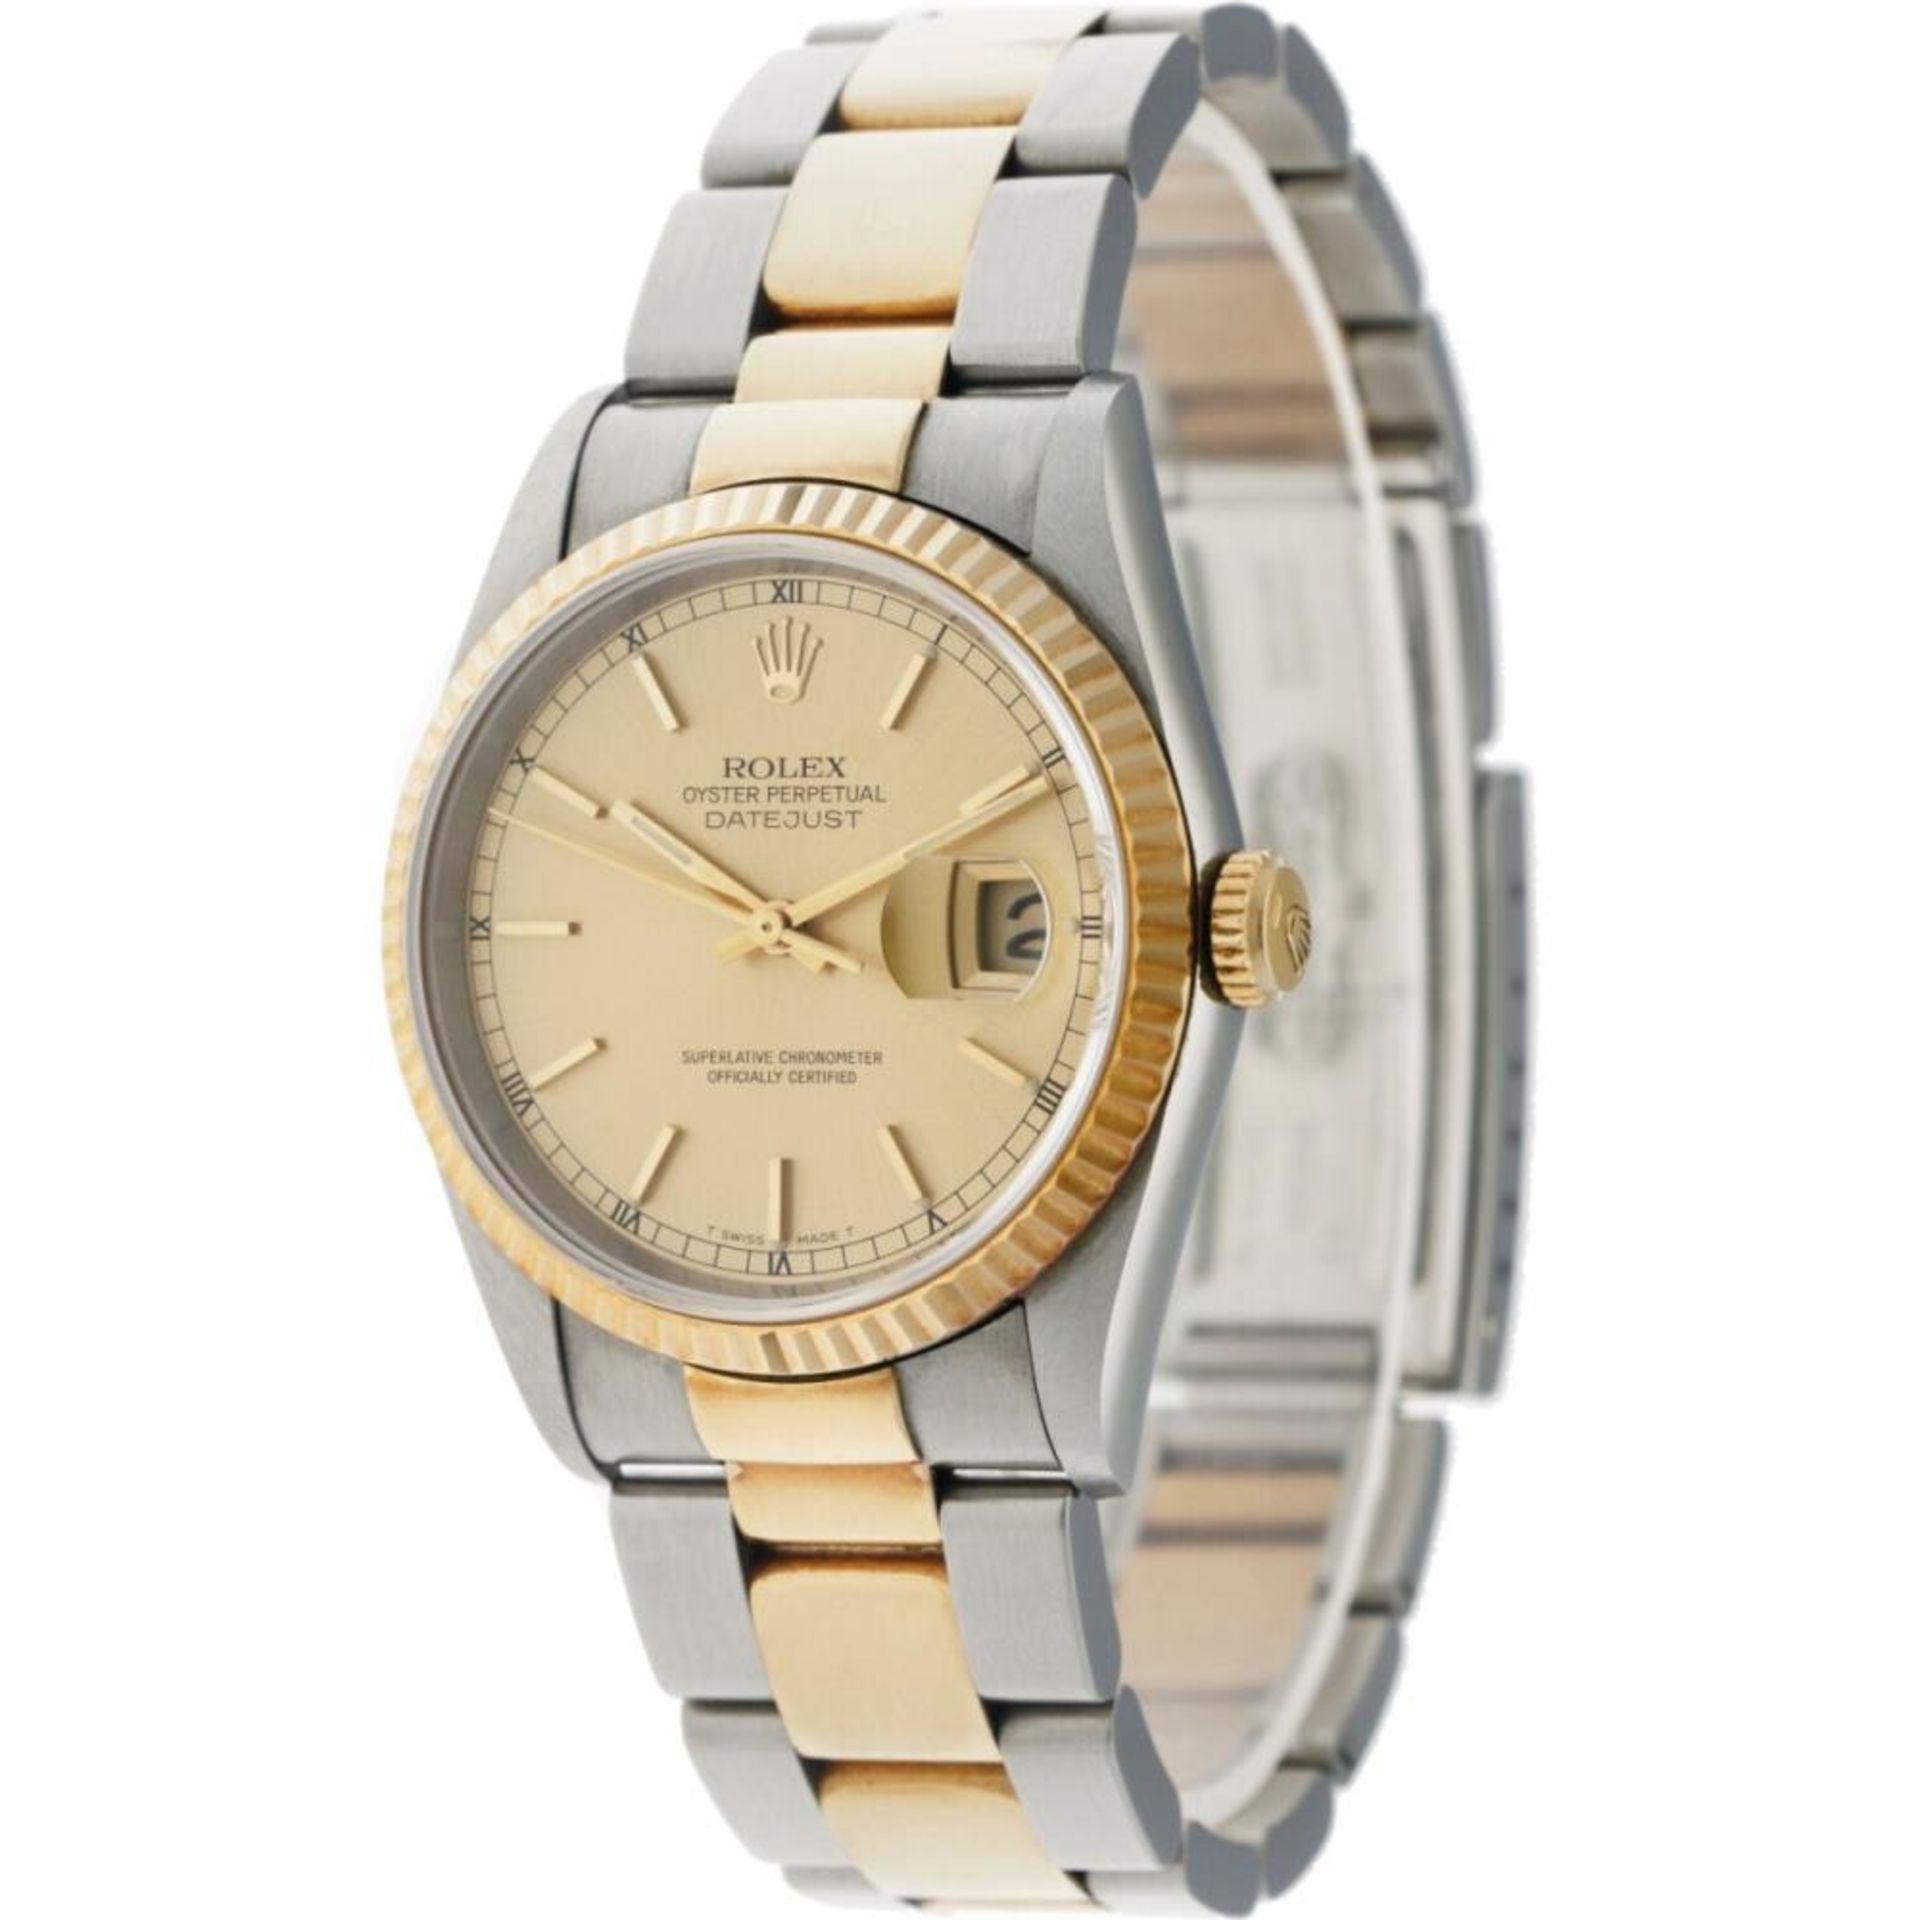 Rolex Datejust 16233 - Men's watch - approx. 1995. - Image 2 of 6